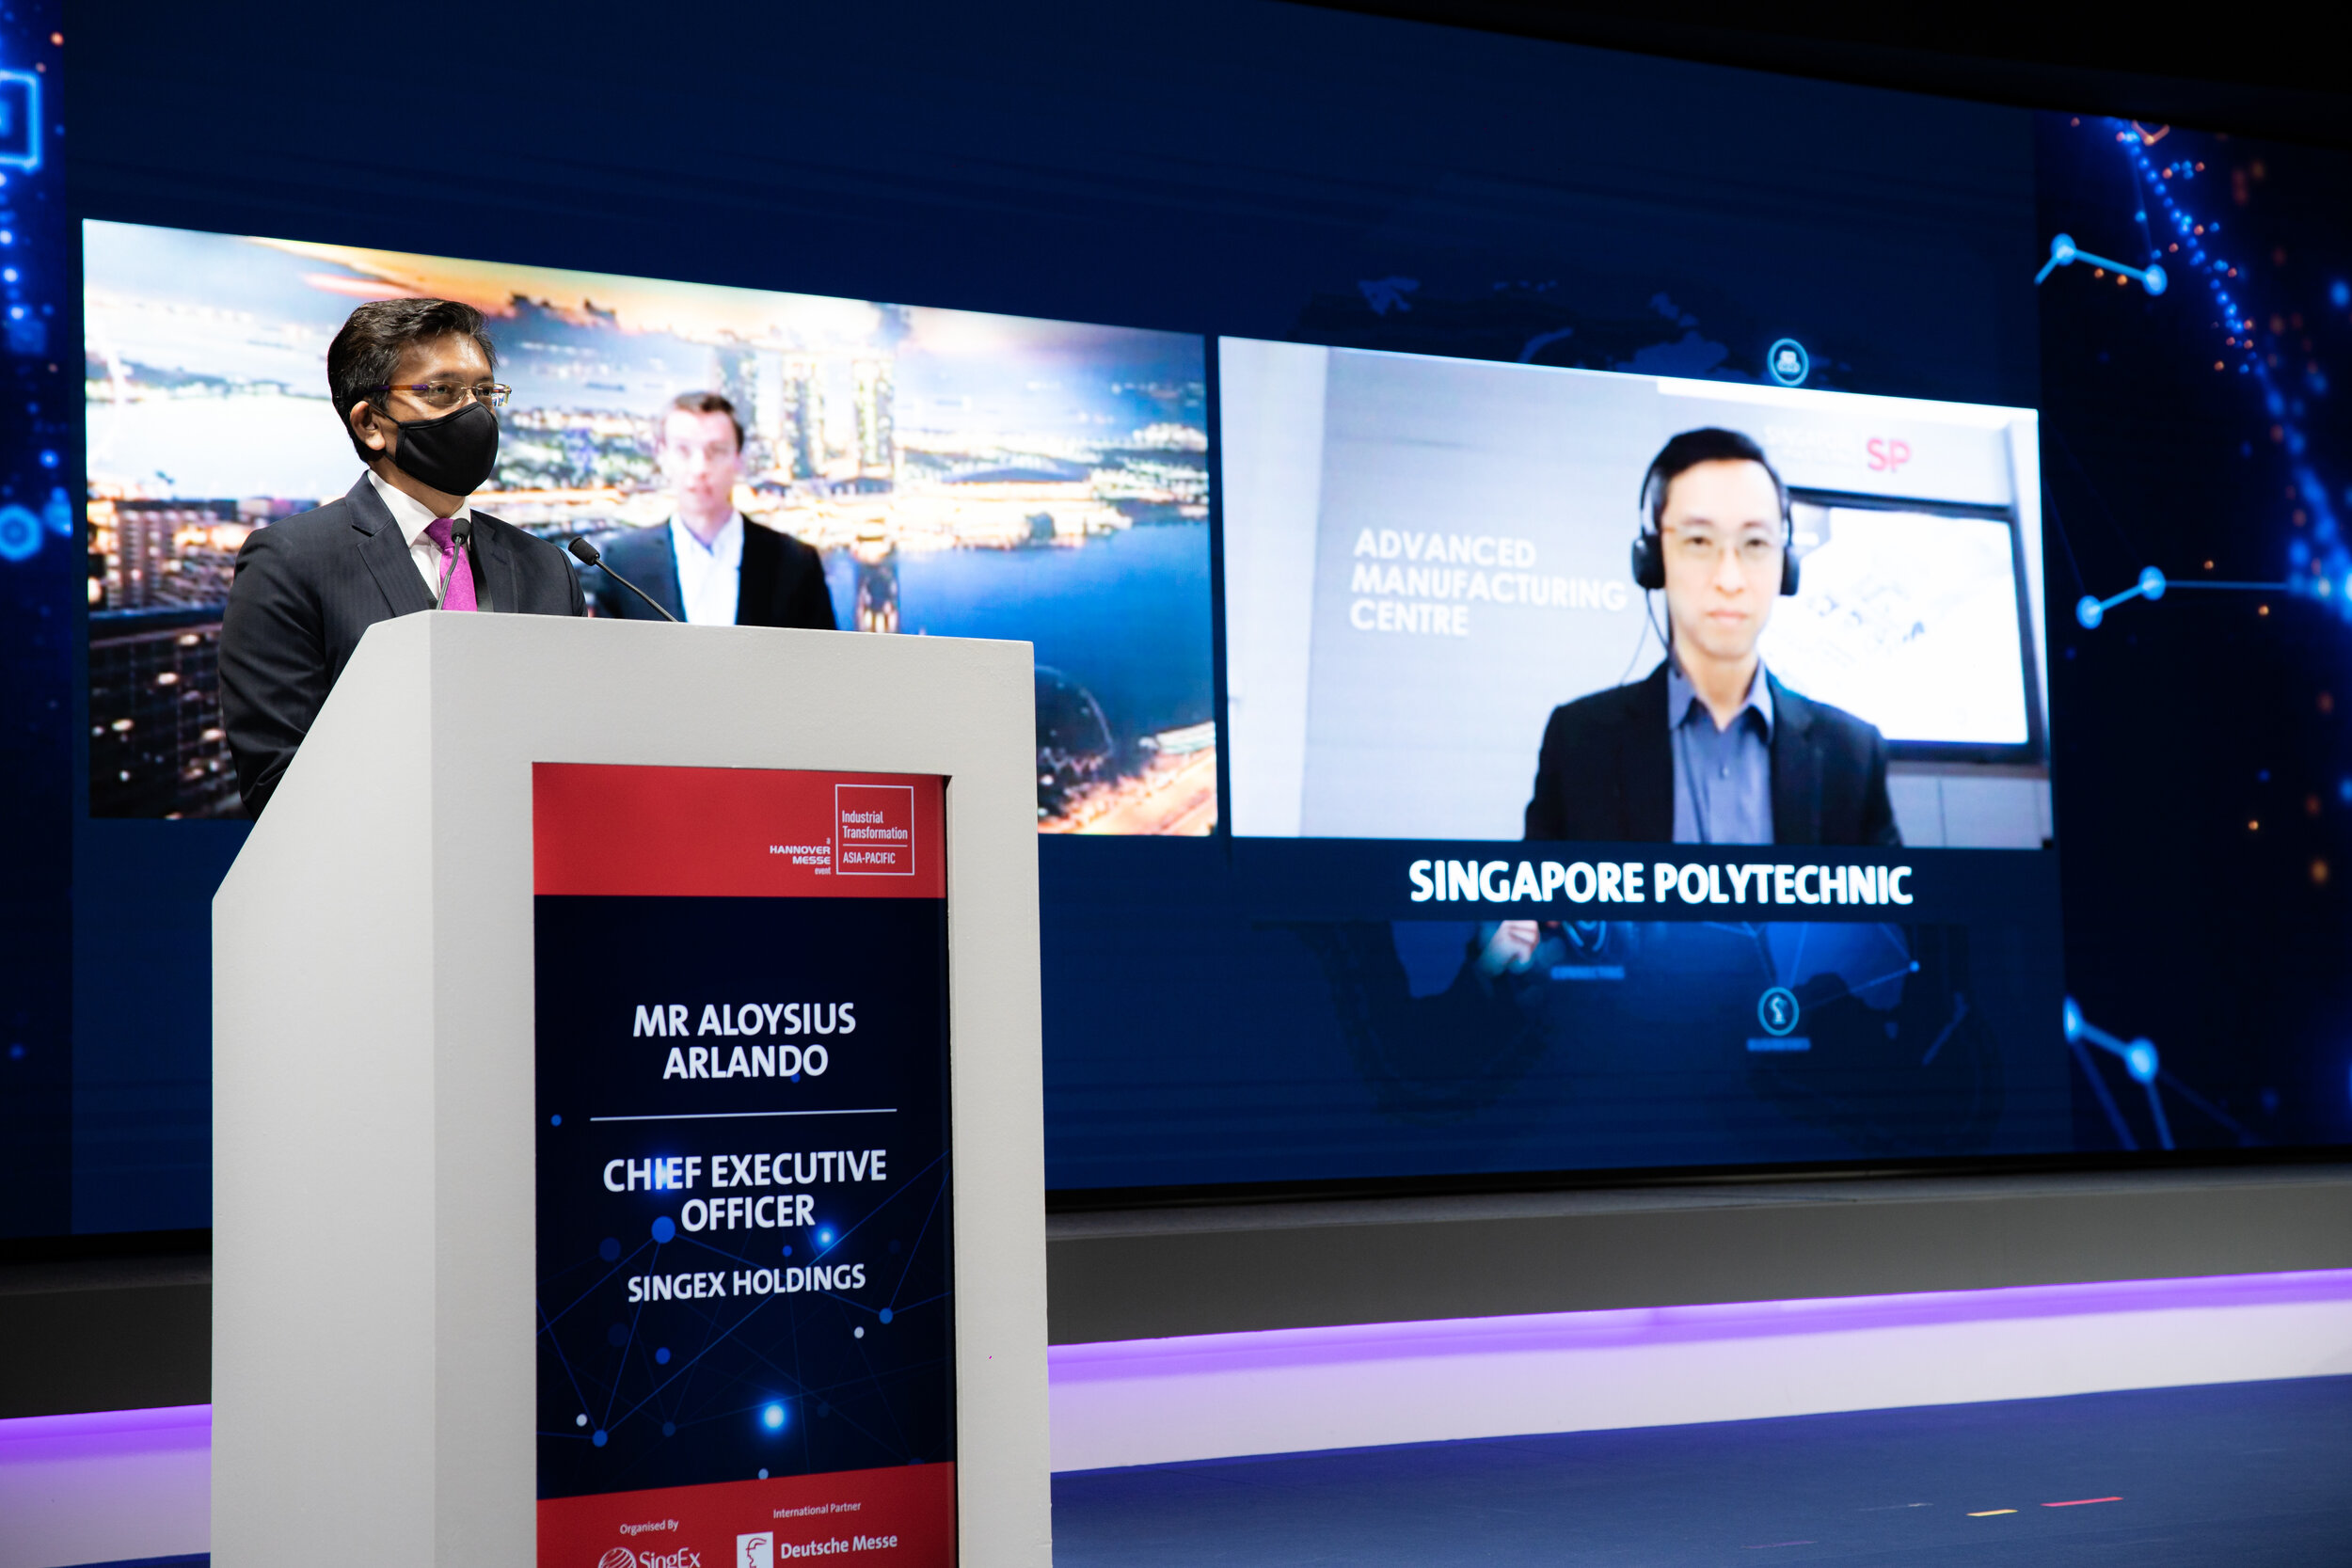 led-video-wall-conference-event